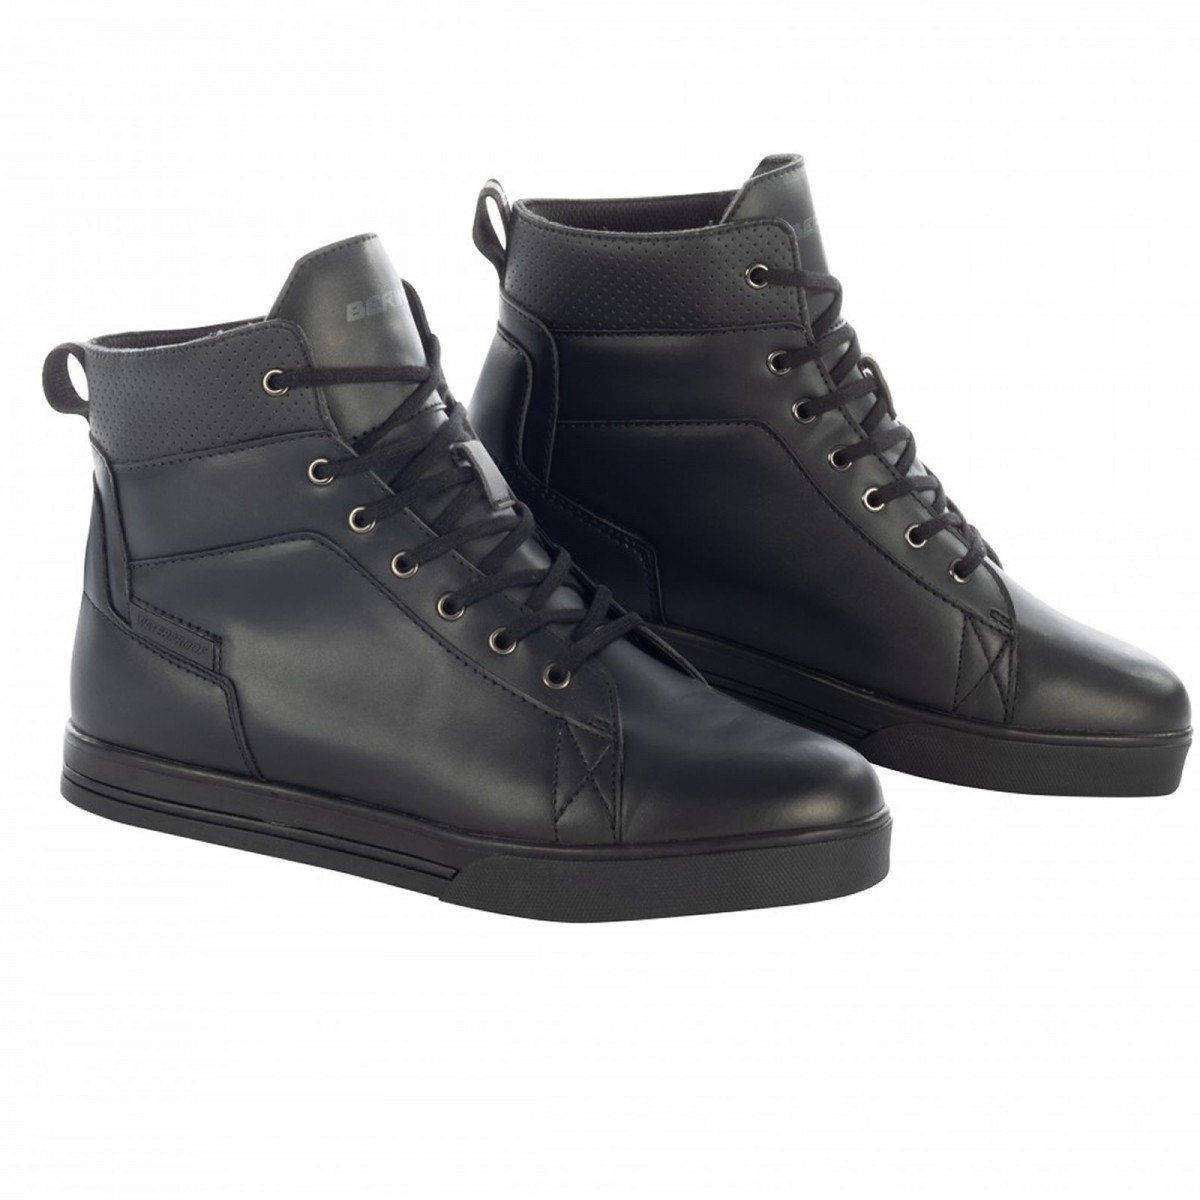 Image of Bering Indy Noir Chaussures Taille 40